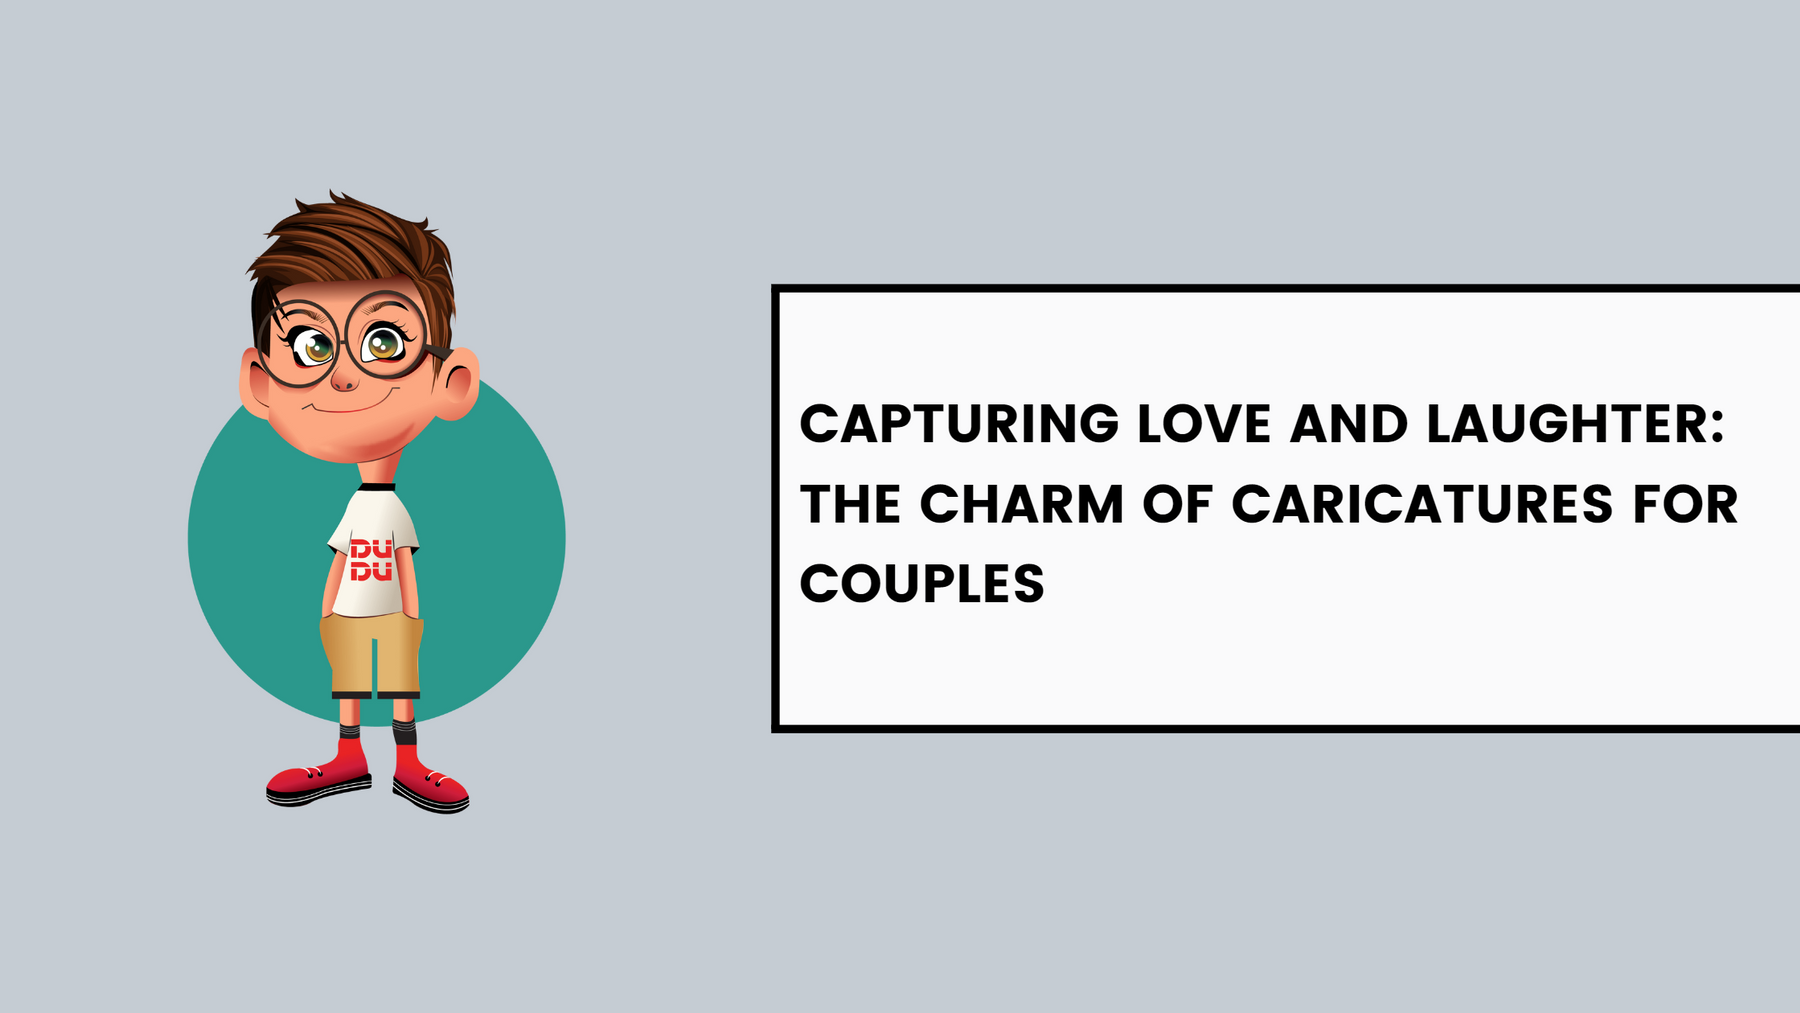 Capturing Love and Laughter: The Charm of Caricatures for Couples